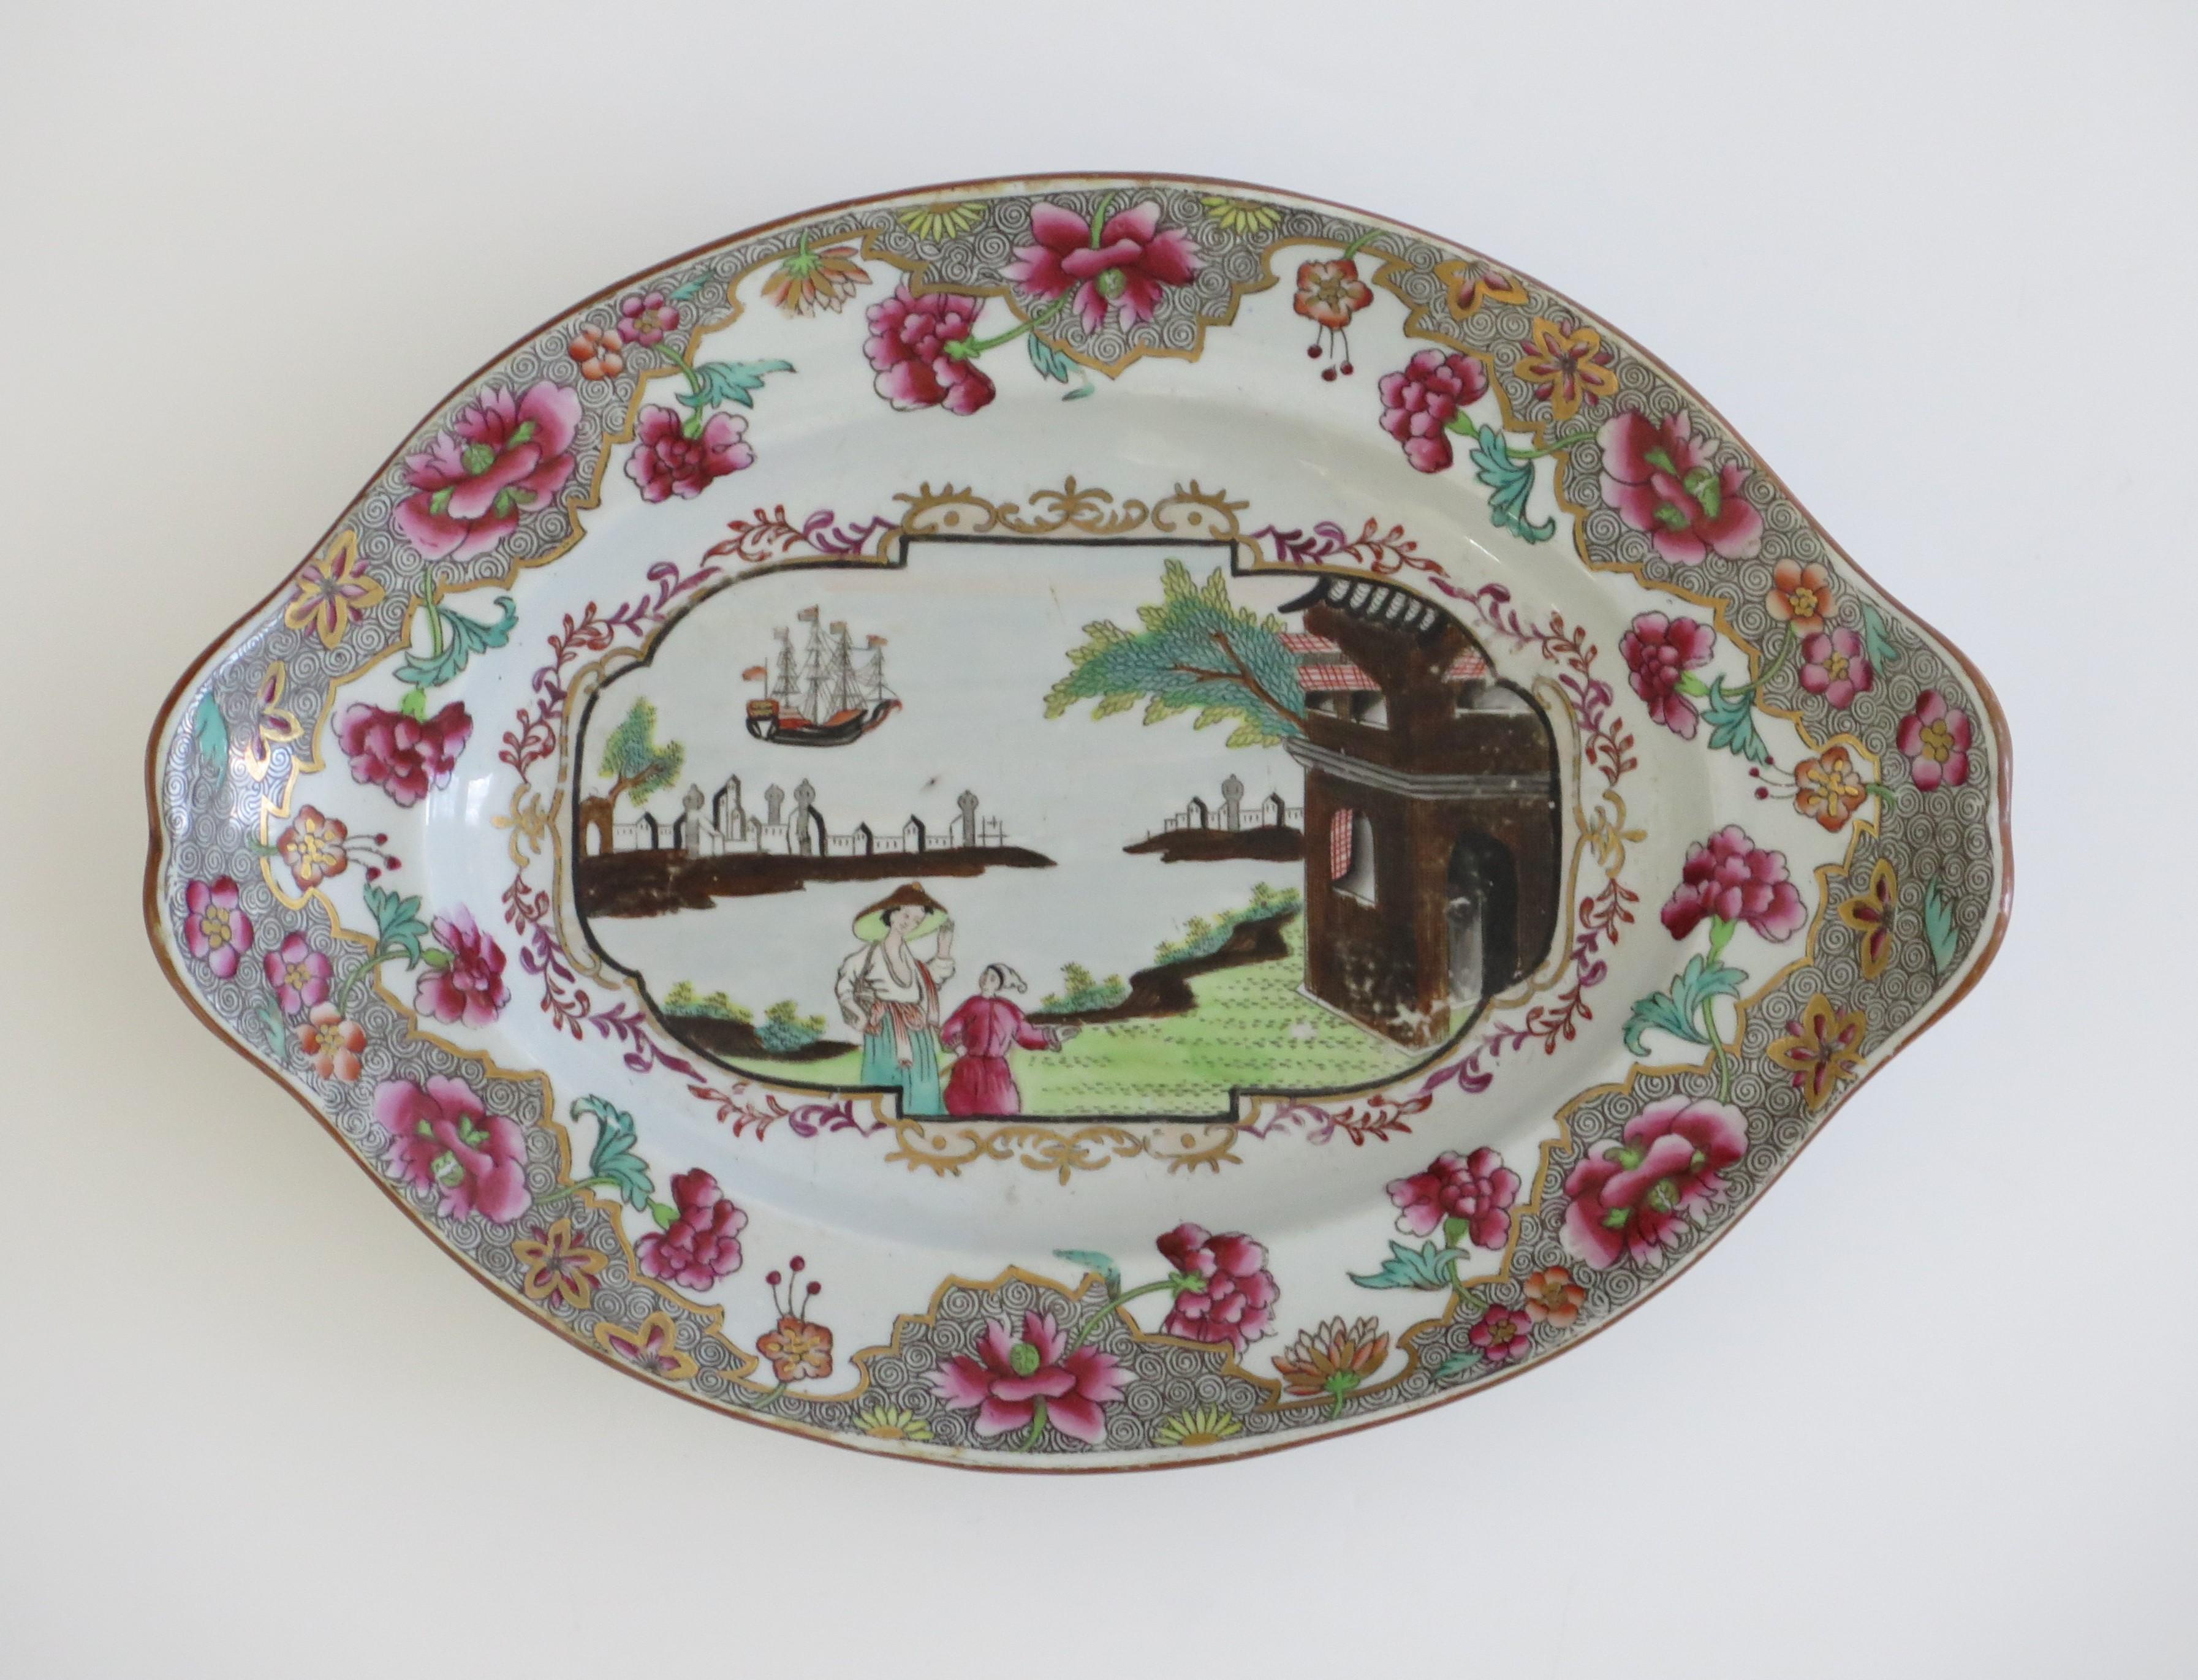 This is a good small Serving Dish made of ironstone (Spode's Stone China) in the Ship Pattern, No 3068, produced by the English, Spode factory early in the 19th century, George 111rd Period.

The pattern is called the Ship pattern number 3068, the